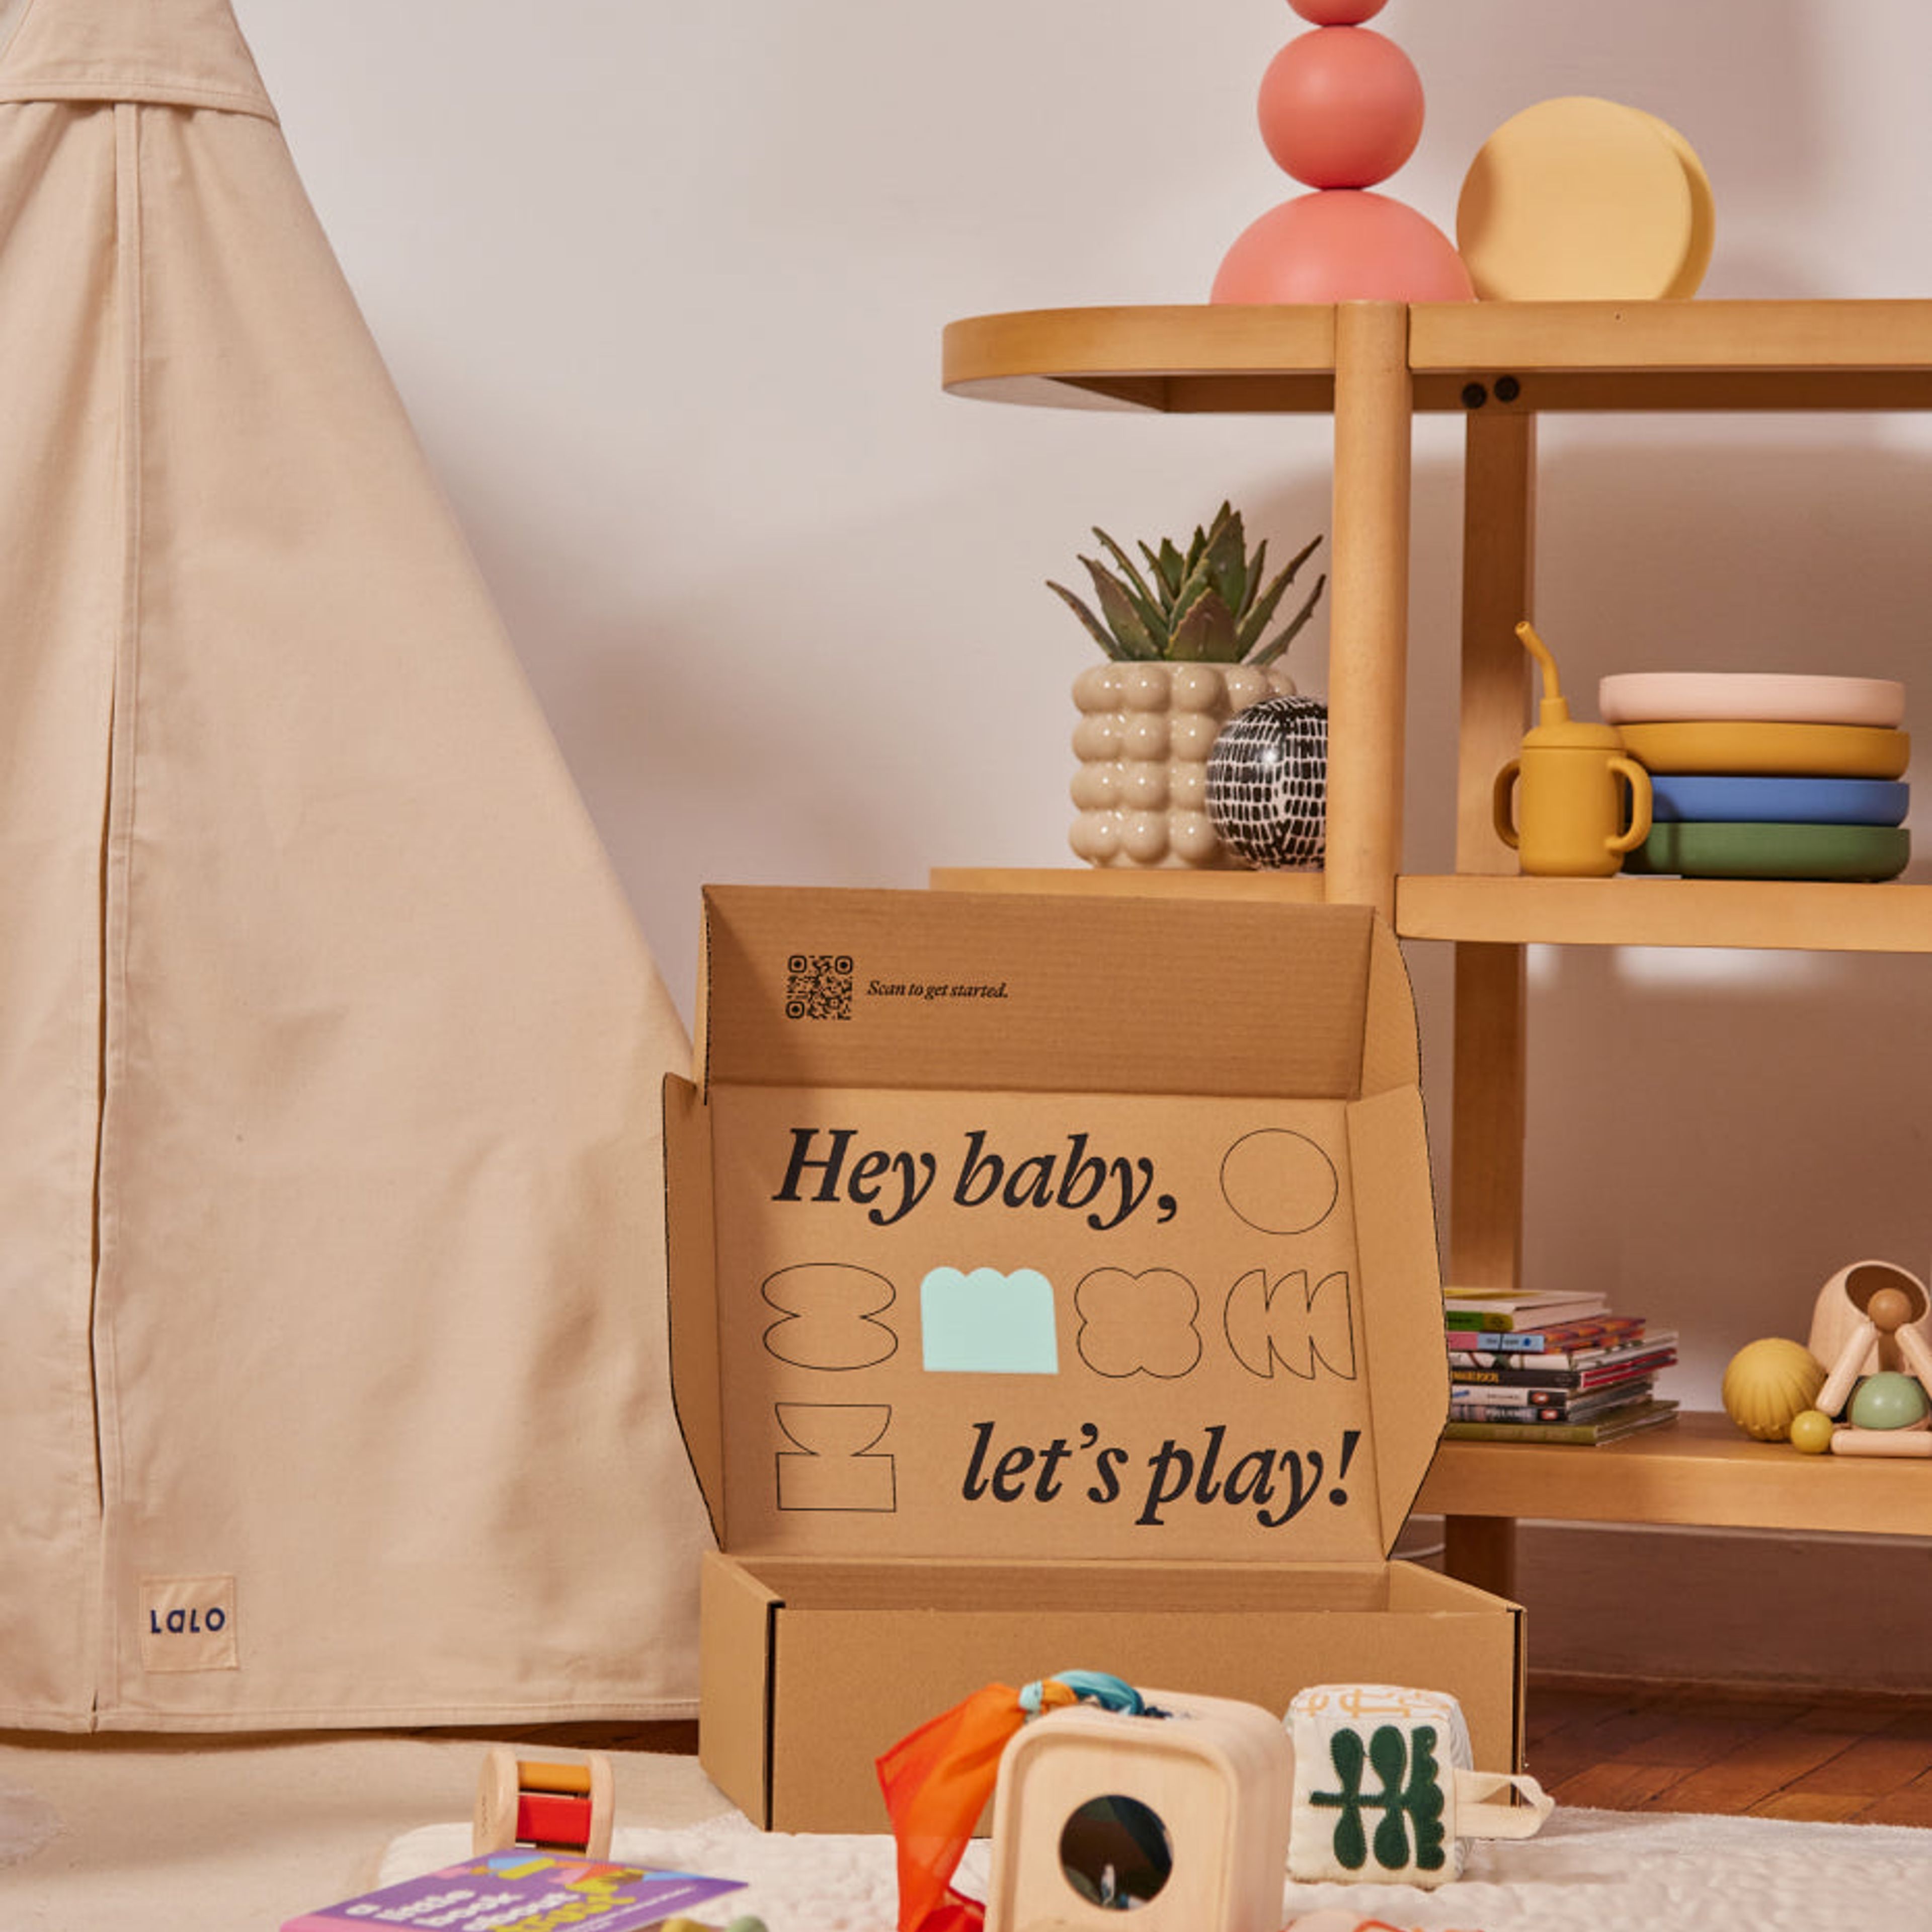 The Play Box: 5-6 Months